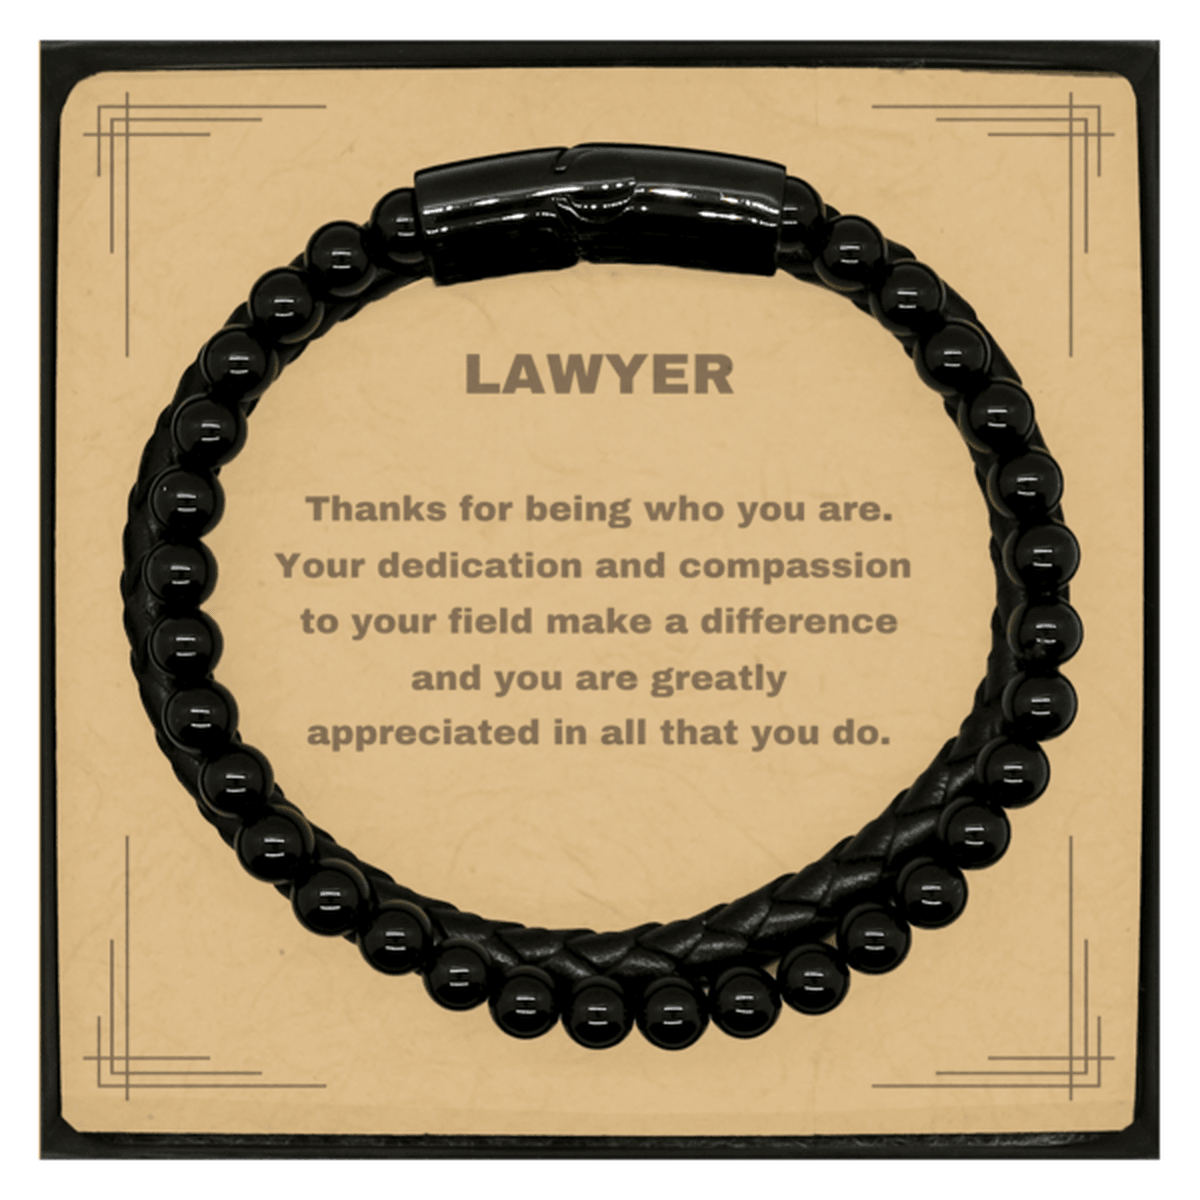 Lawyer Black Braided Leather Stone Bracelet - Thanks for being who you are - Birthday Christmas Jewelry Gifts Coworkers Colleague Boss - Mallard Moon Gift Shop